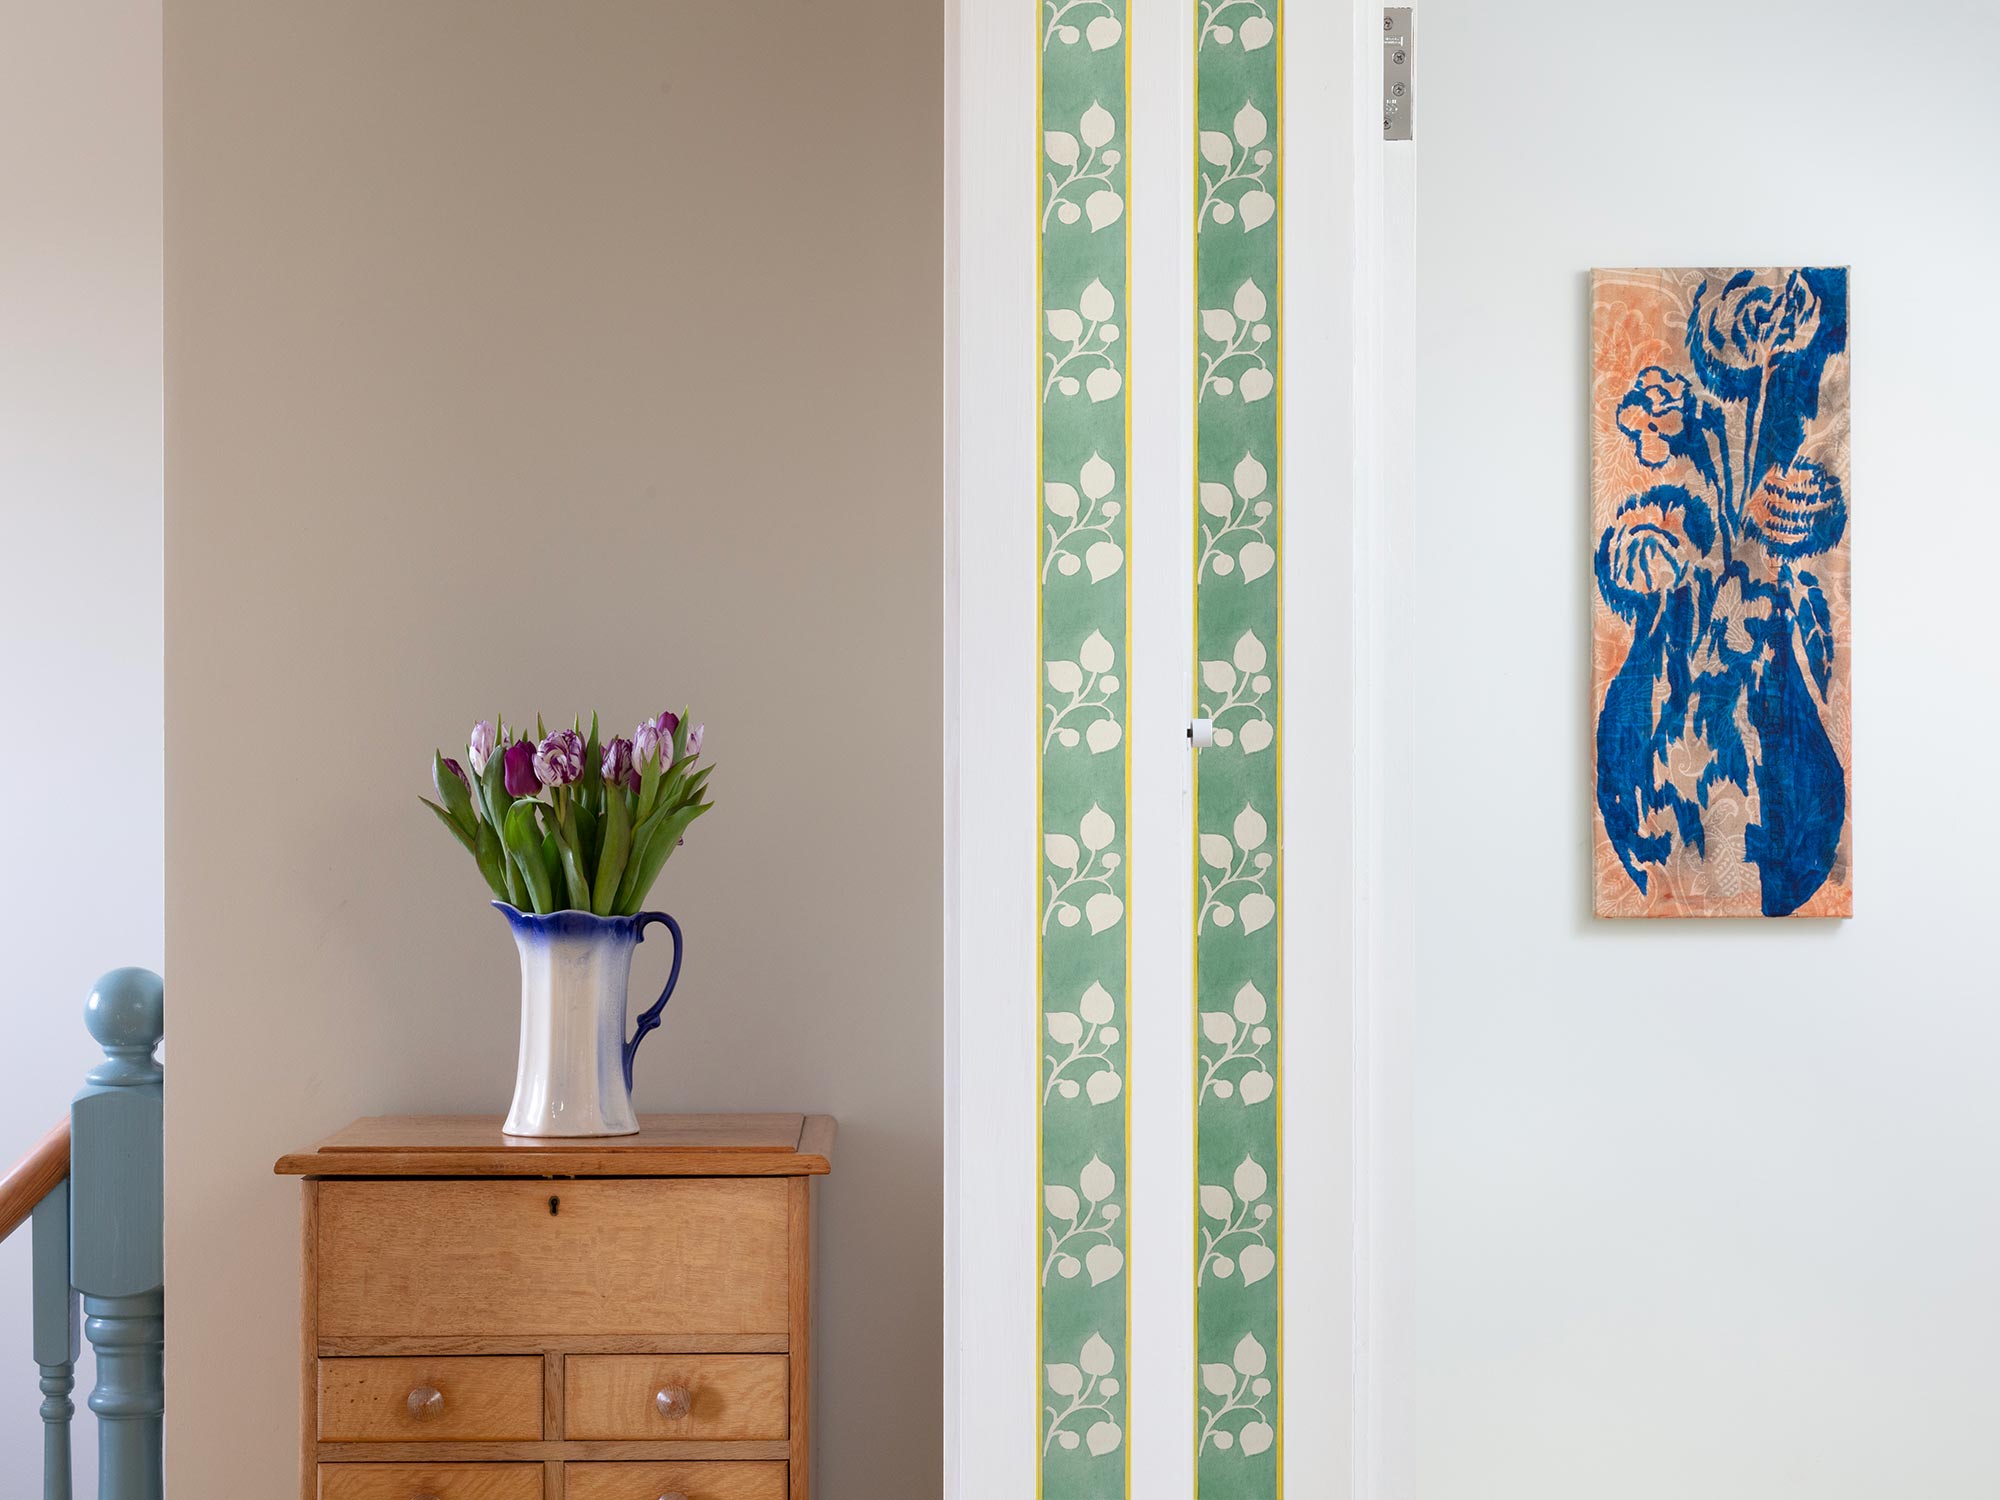 Striped green and yellow flowered wallpaper border from 1918 by Arts & Crafts artist CFA Voysey, pictured with flowers in jug on chest of drawers